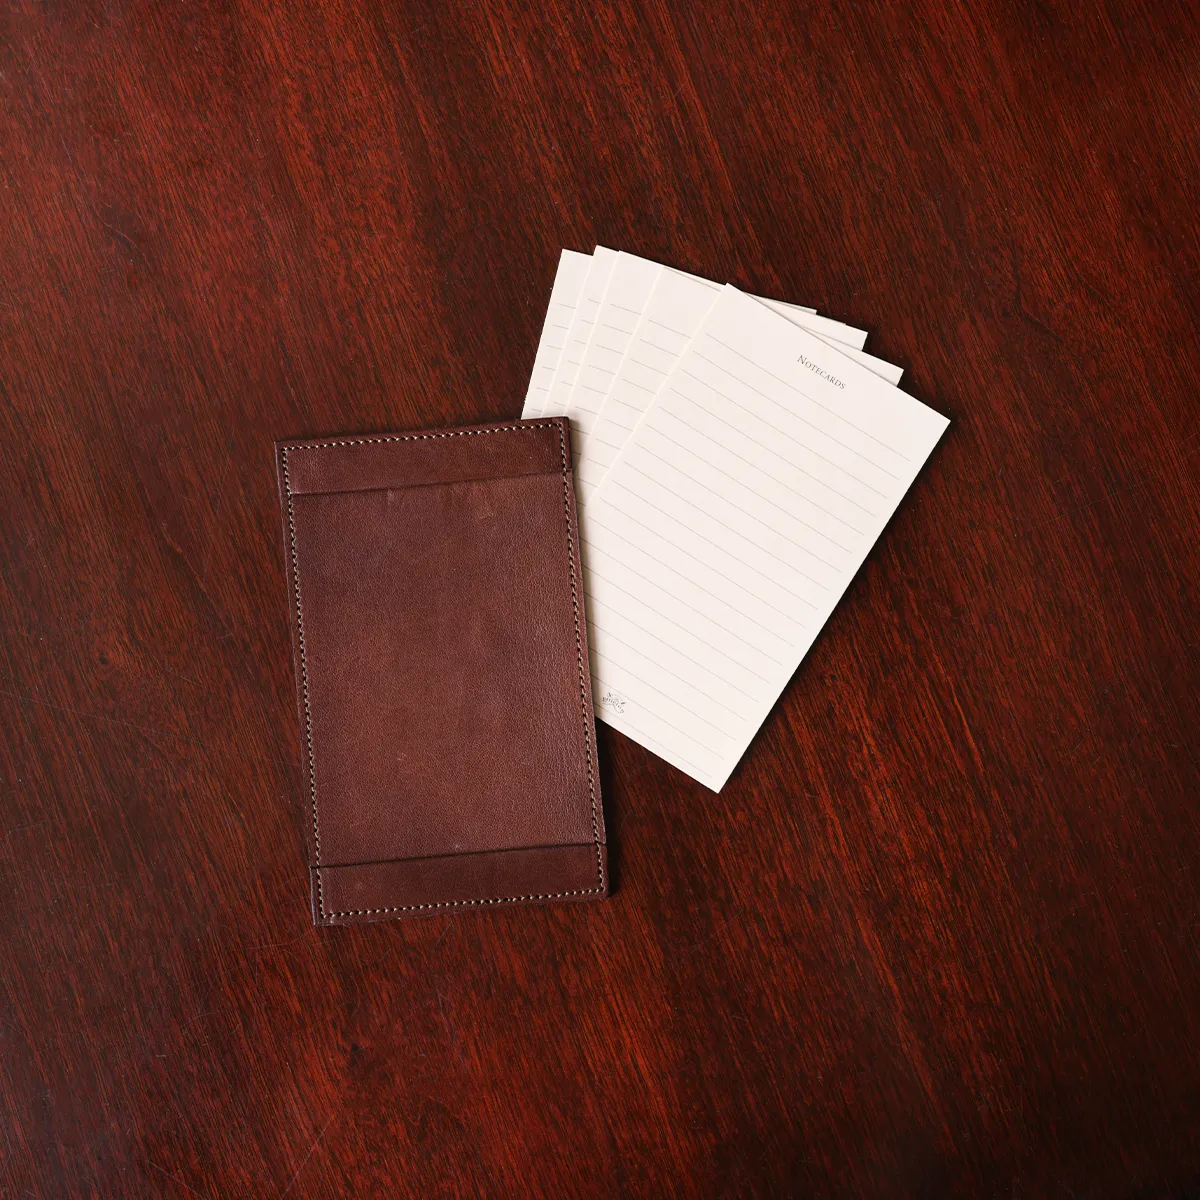 no1 vintage brown leather note card case with notes on a wooden table